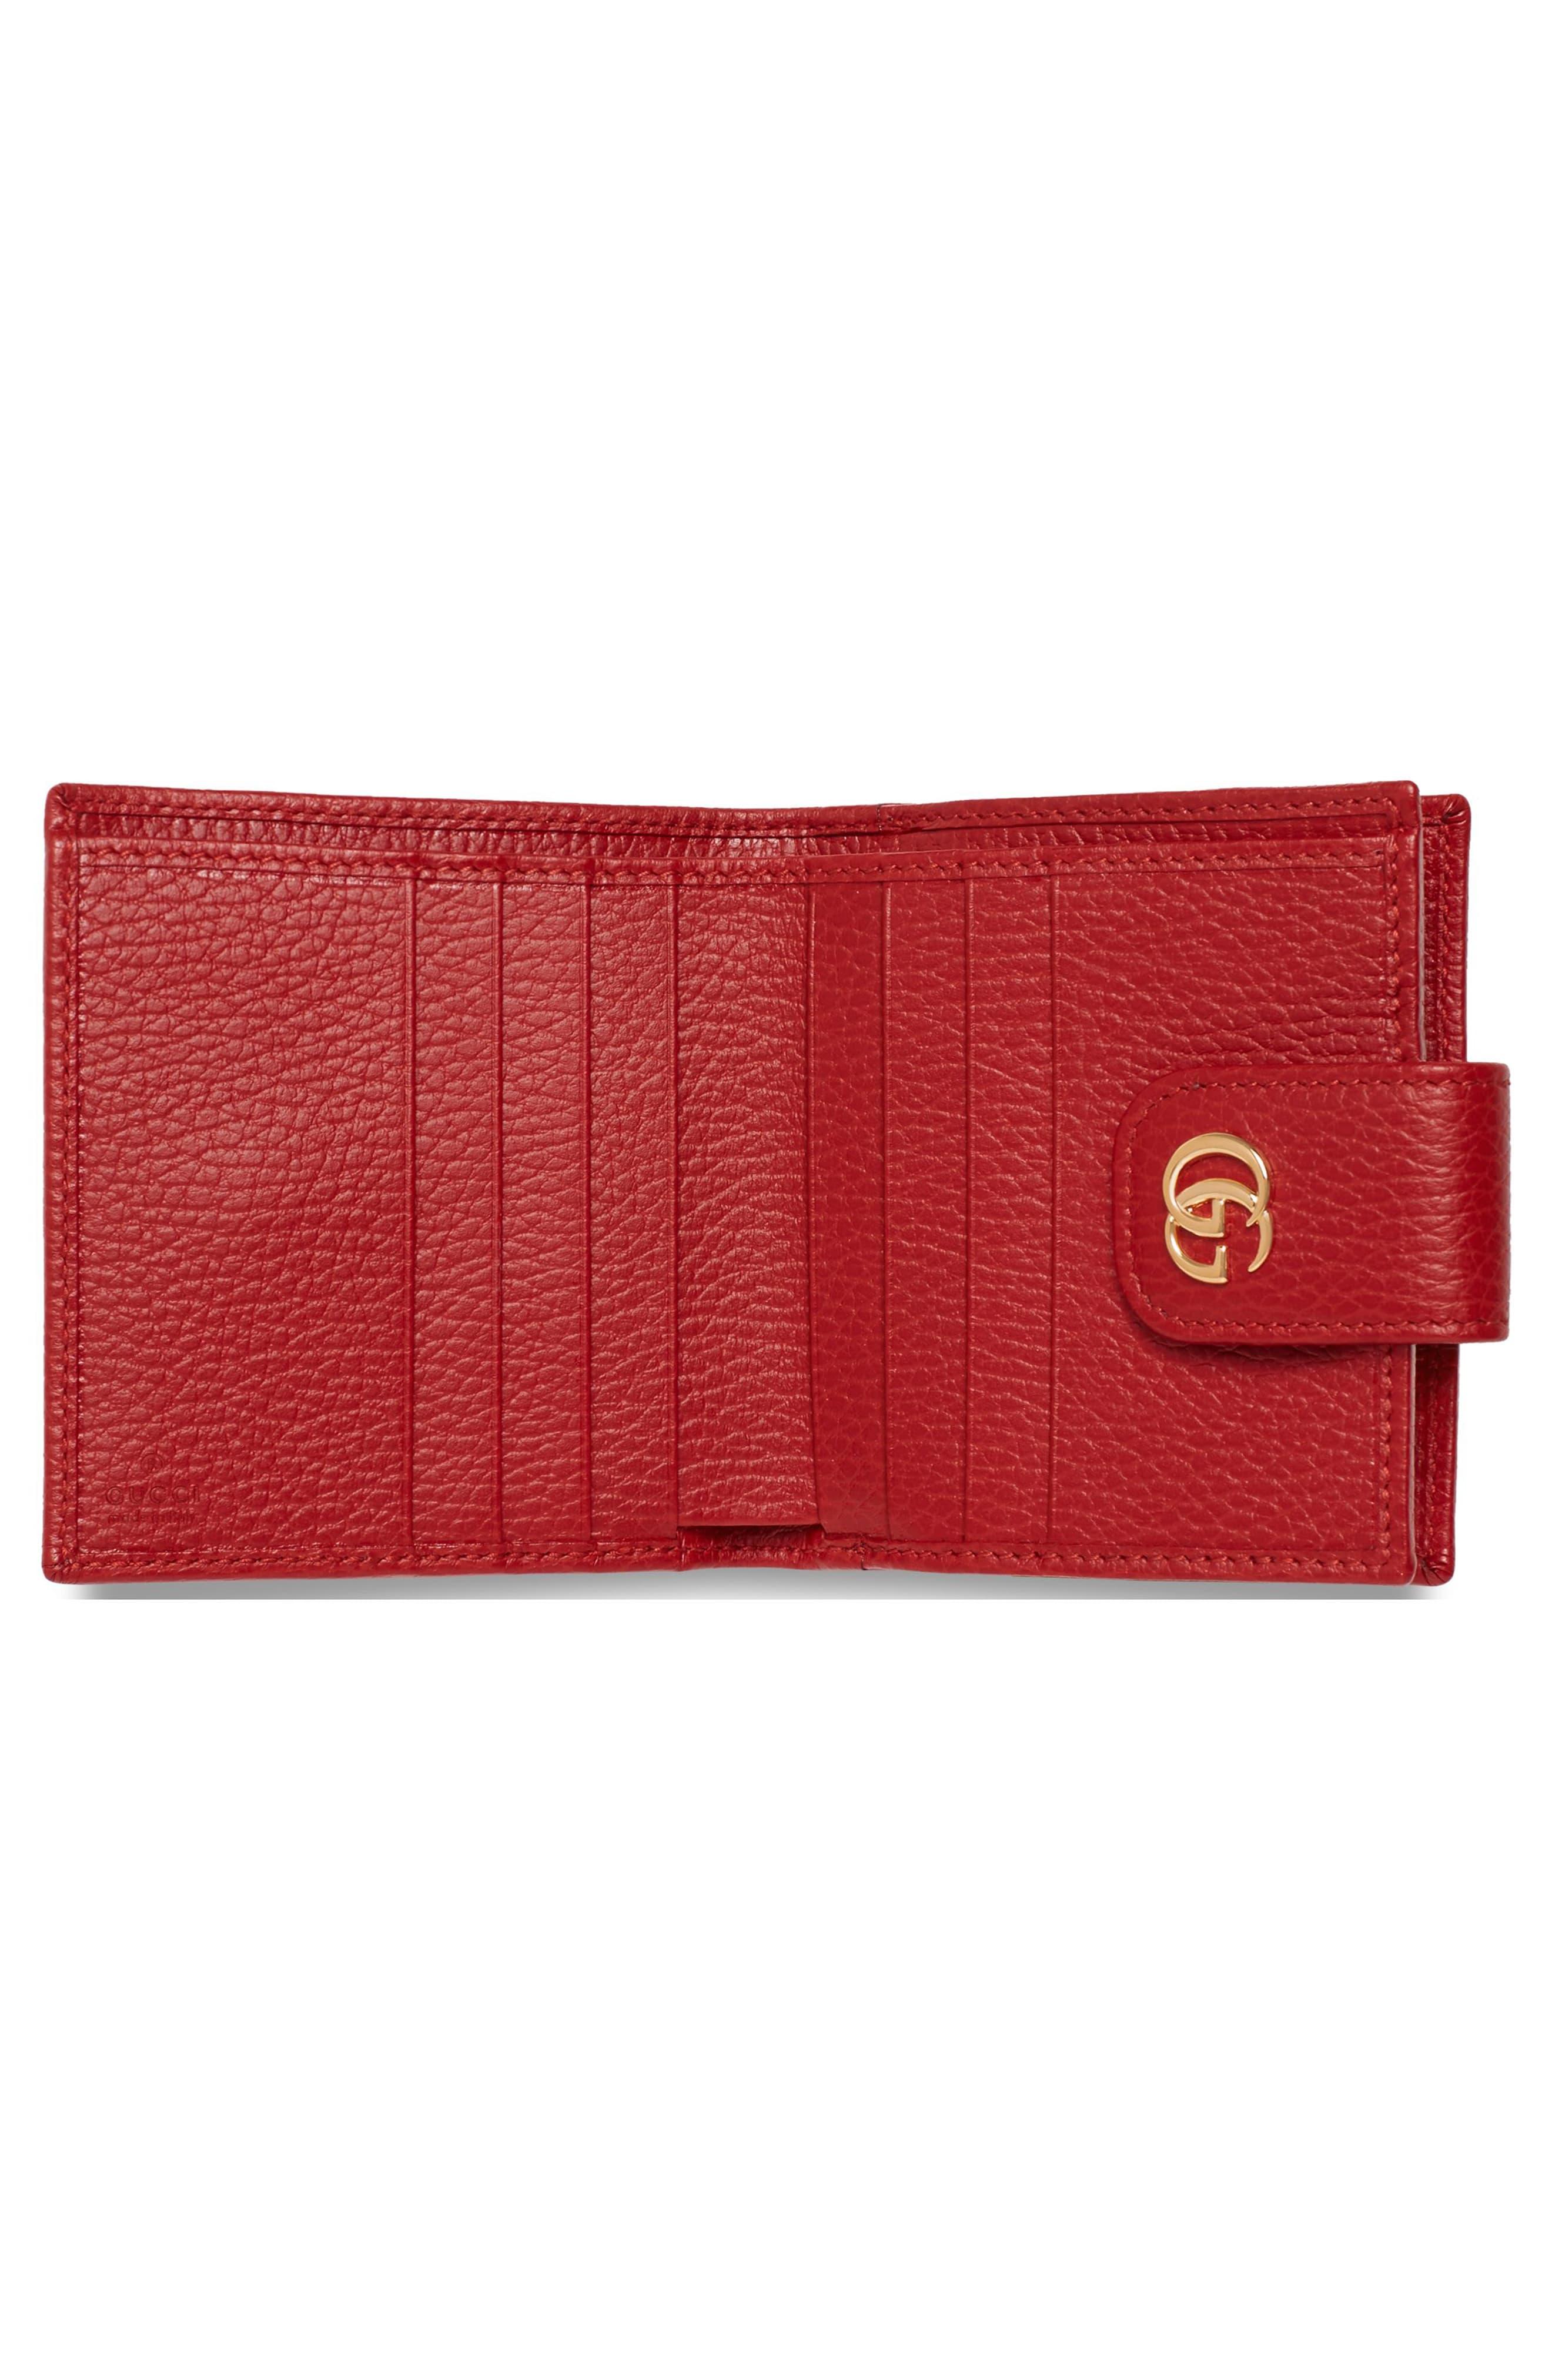 Gucci Gg Marmont Leather Wallet in Red - Lyst